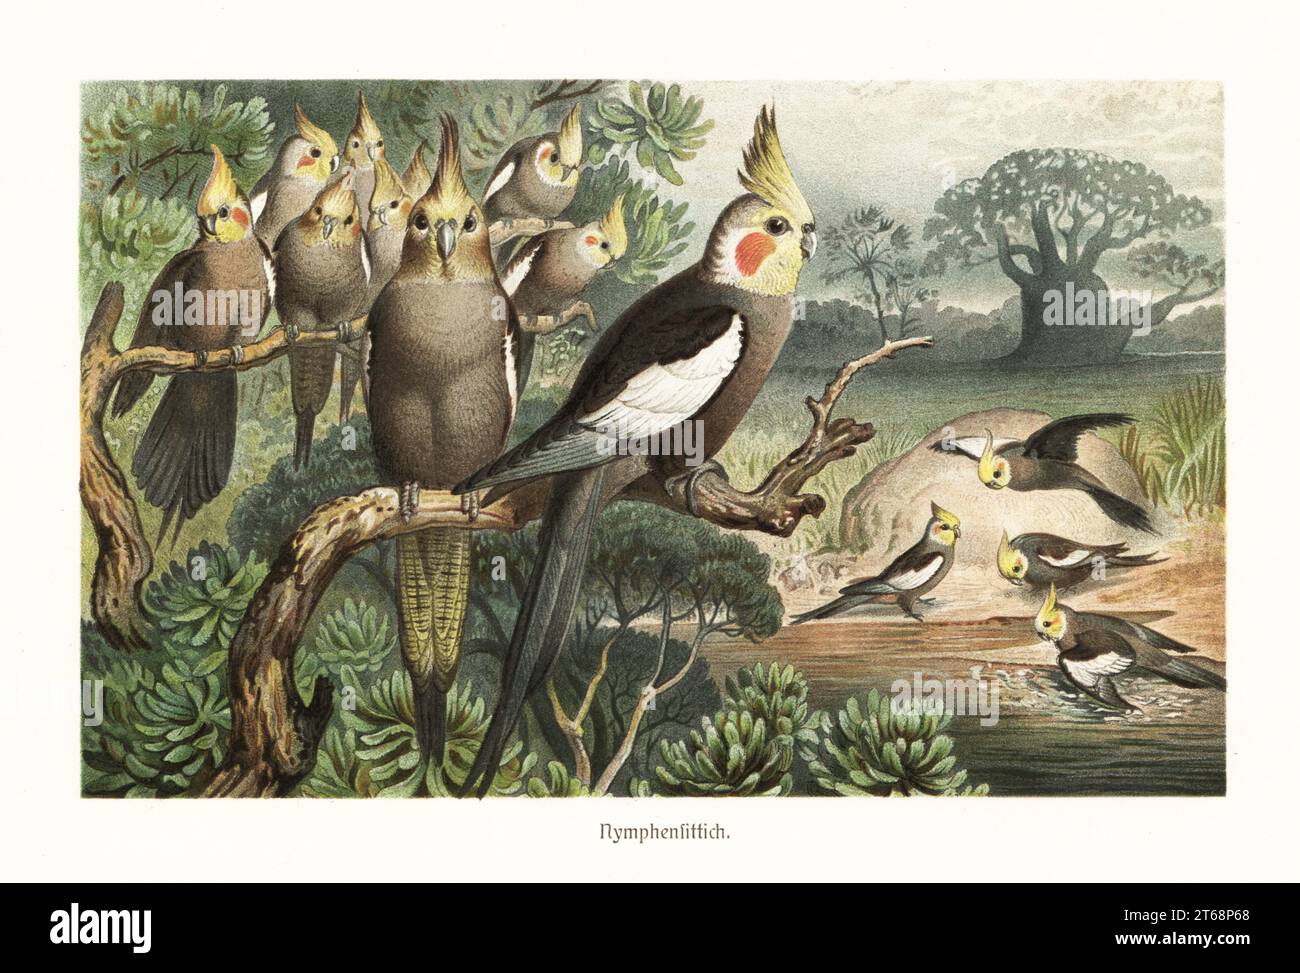 Flock of cockatiels, weiro birds or quarrion, Nymphicus hollandicus, at a water hole. An Australian baobab tree, Adansonia gregorii, in the background. Chromolithograph by Robert Kretschmer from Alfred Edmund Brehm's Tierleben (Brehm's Animal Life), Bibliographisches Institut, Leipzig, 1882. Stock Photo